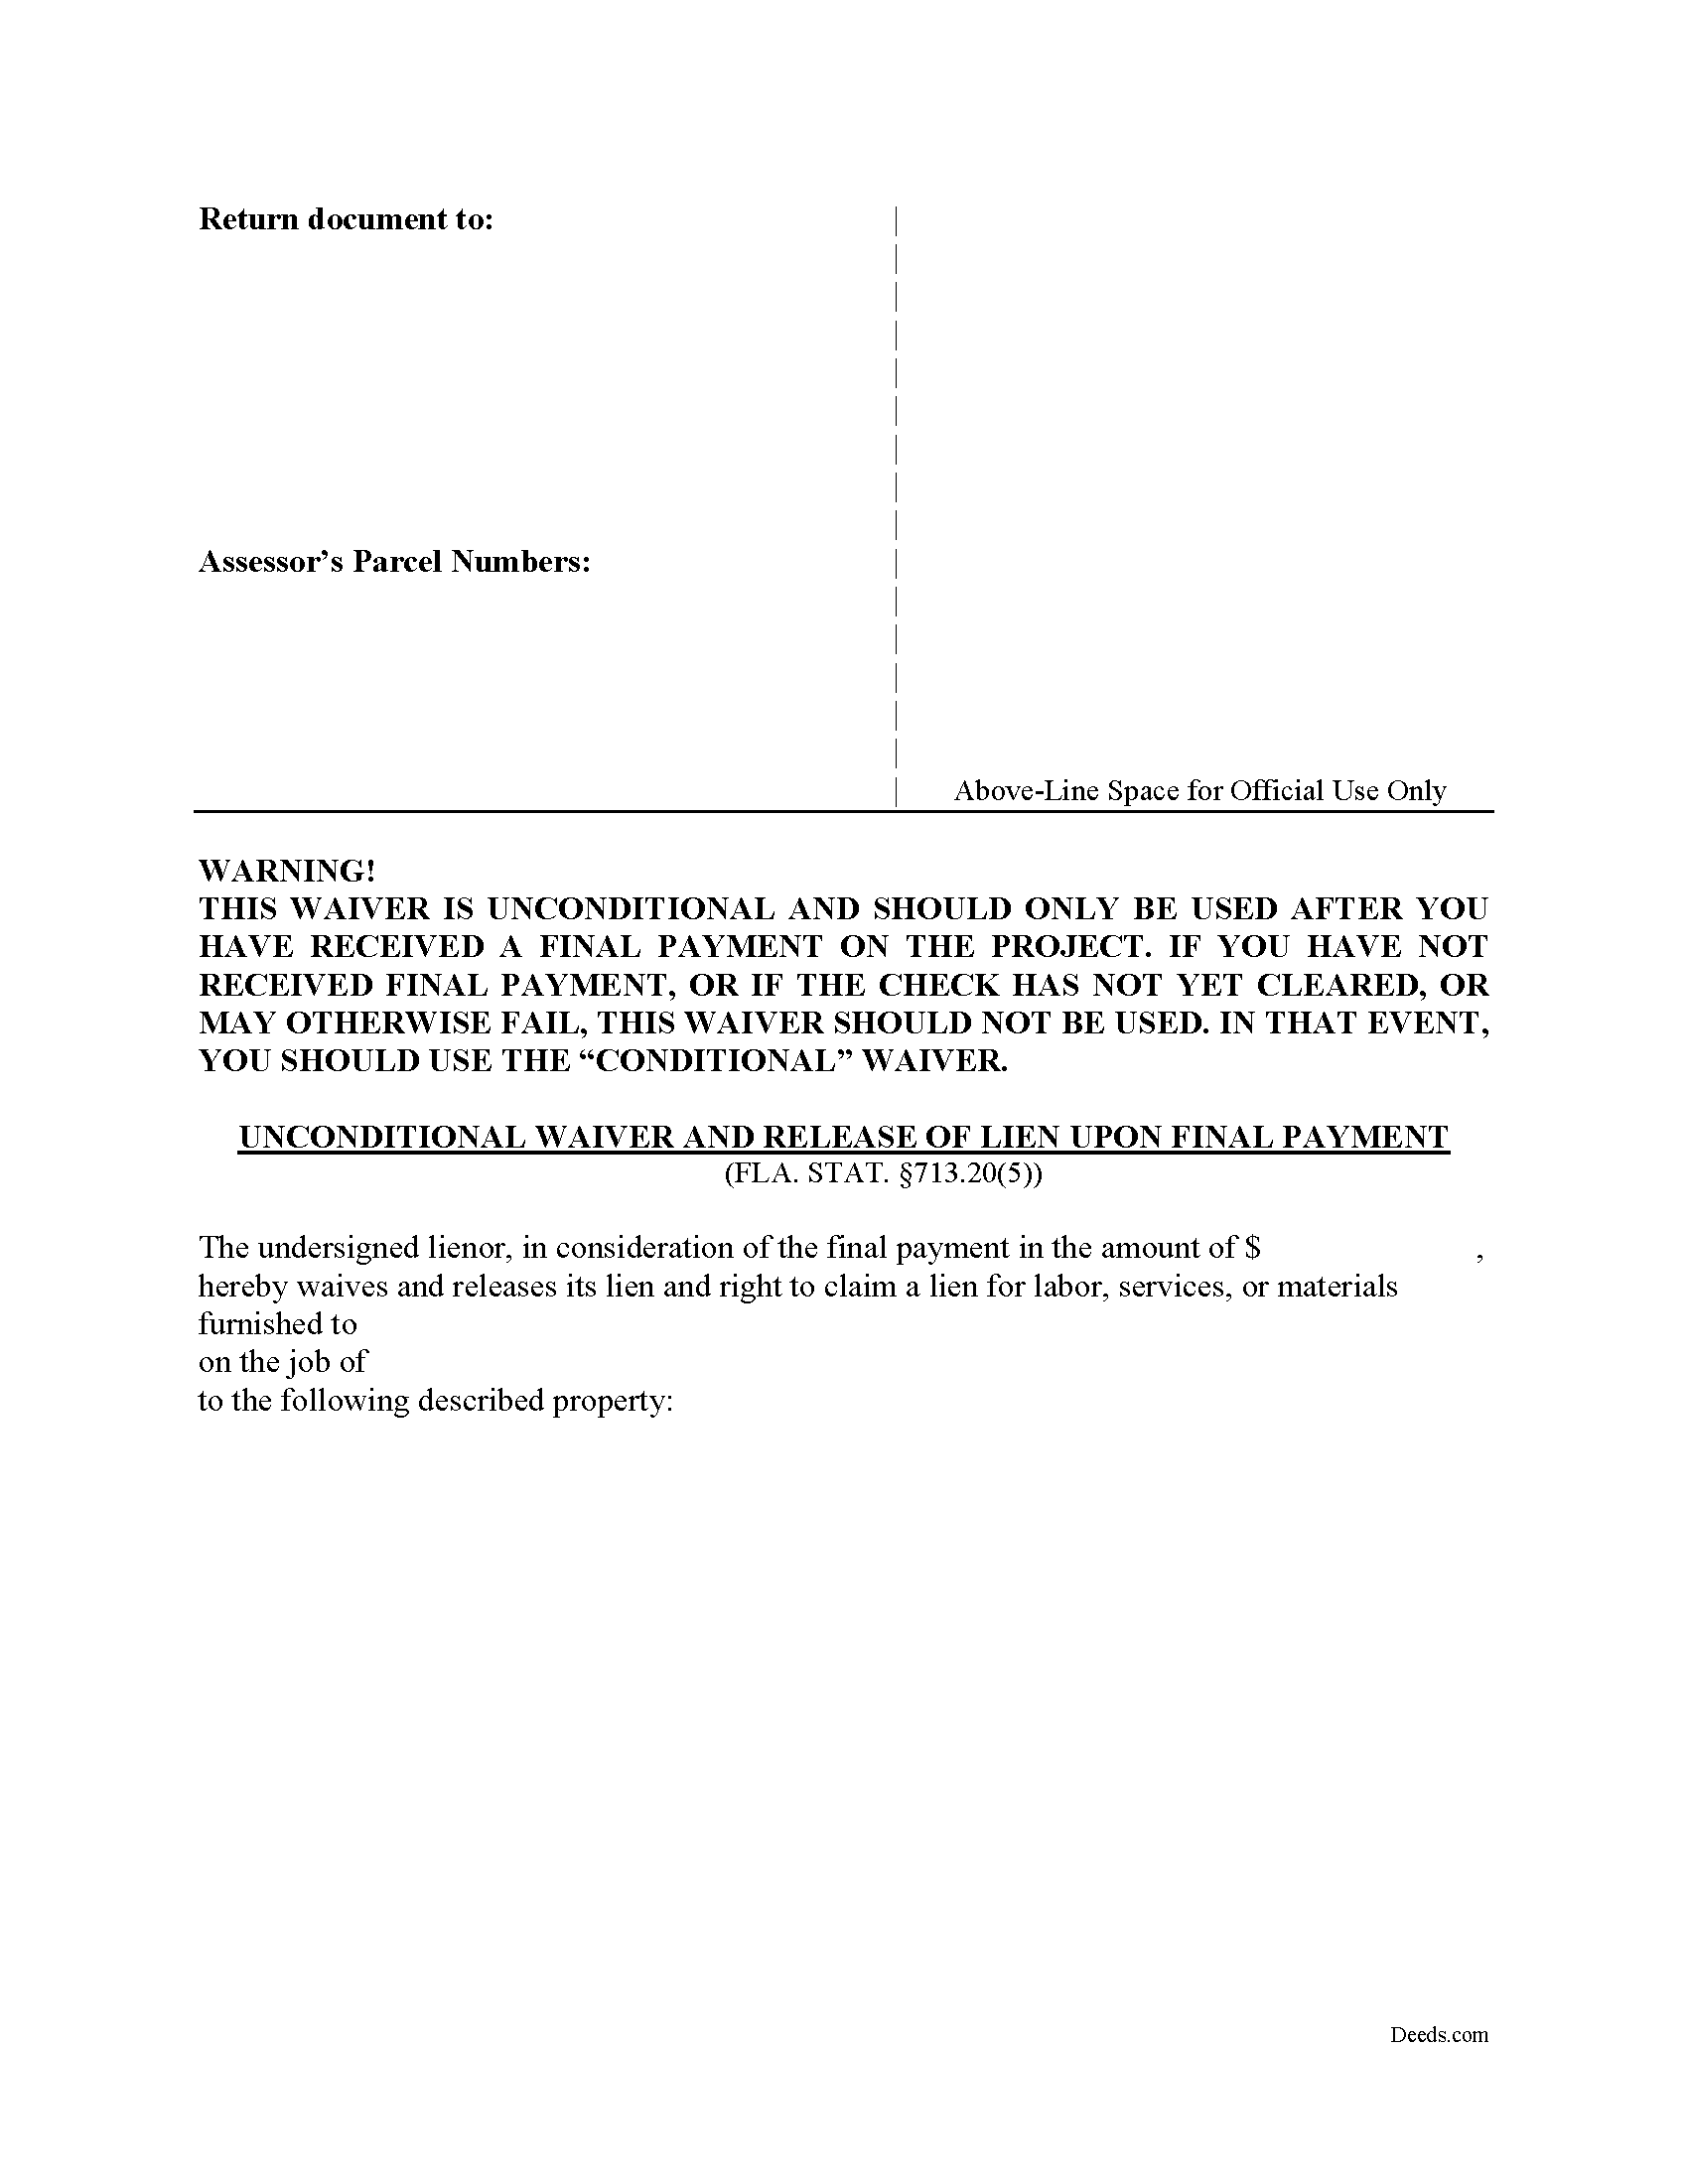 Florida Unconditional Waiver upon Final Payment Image